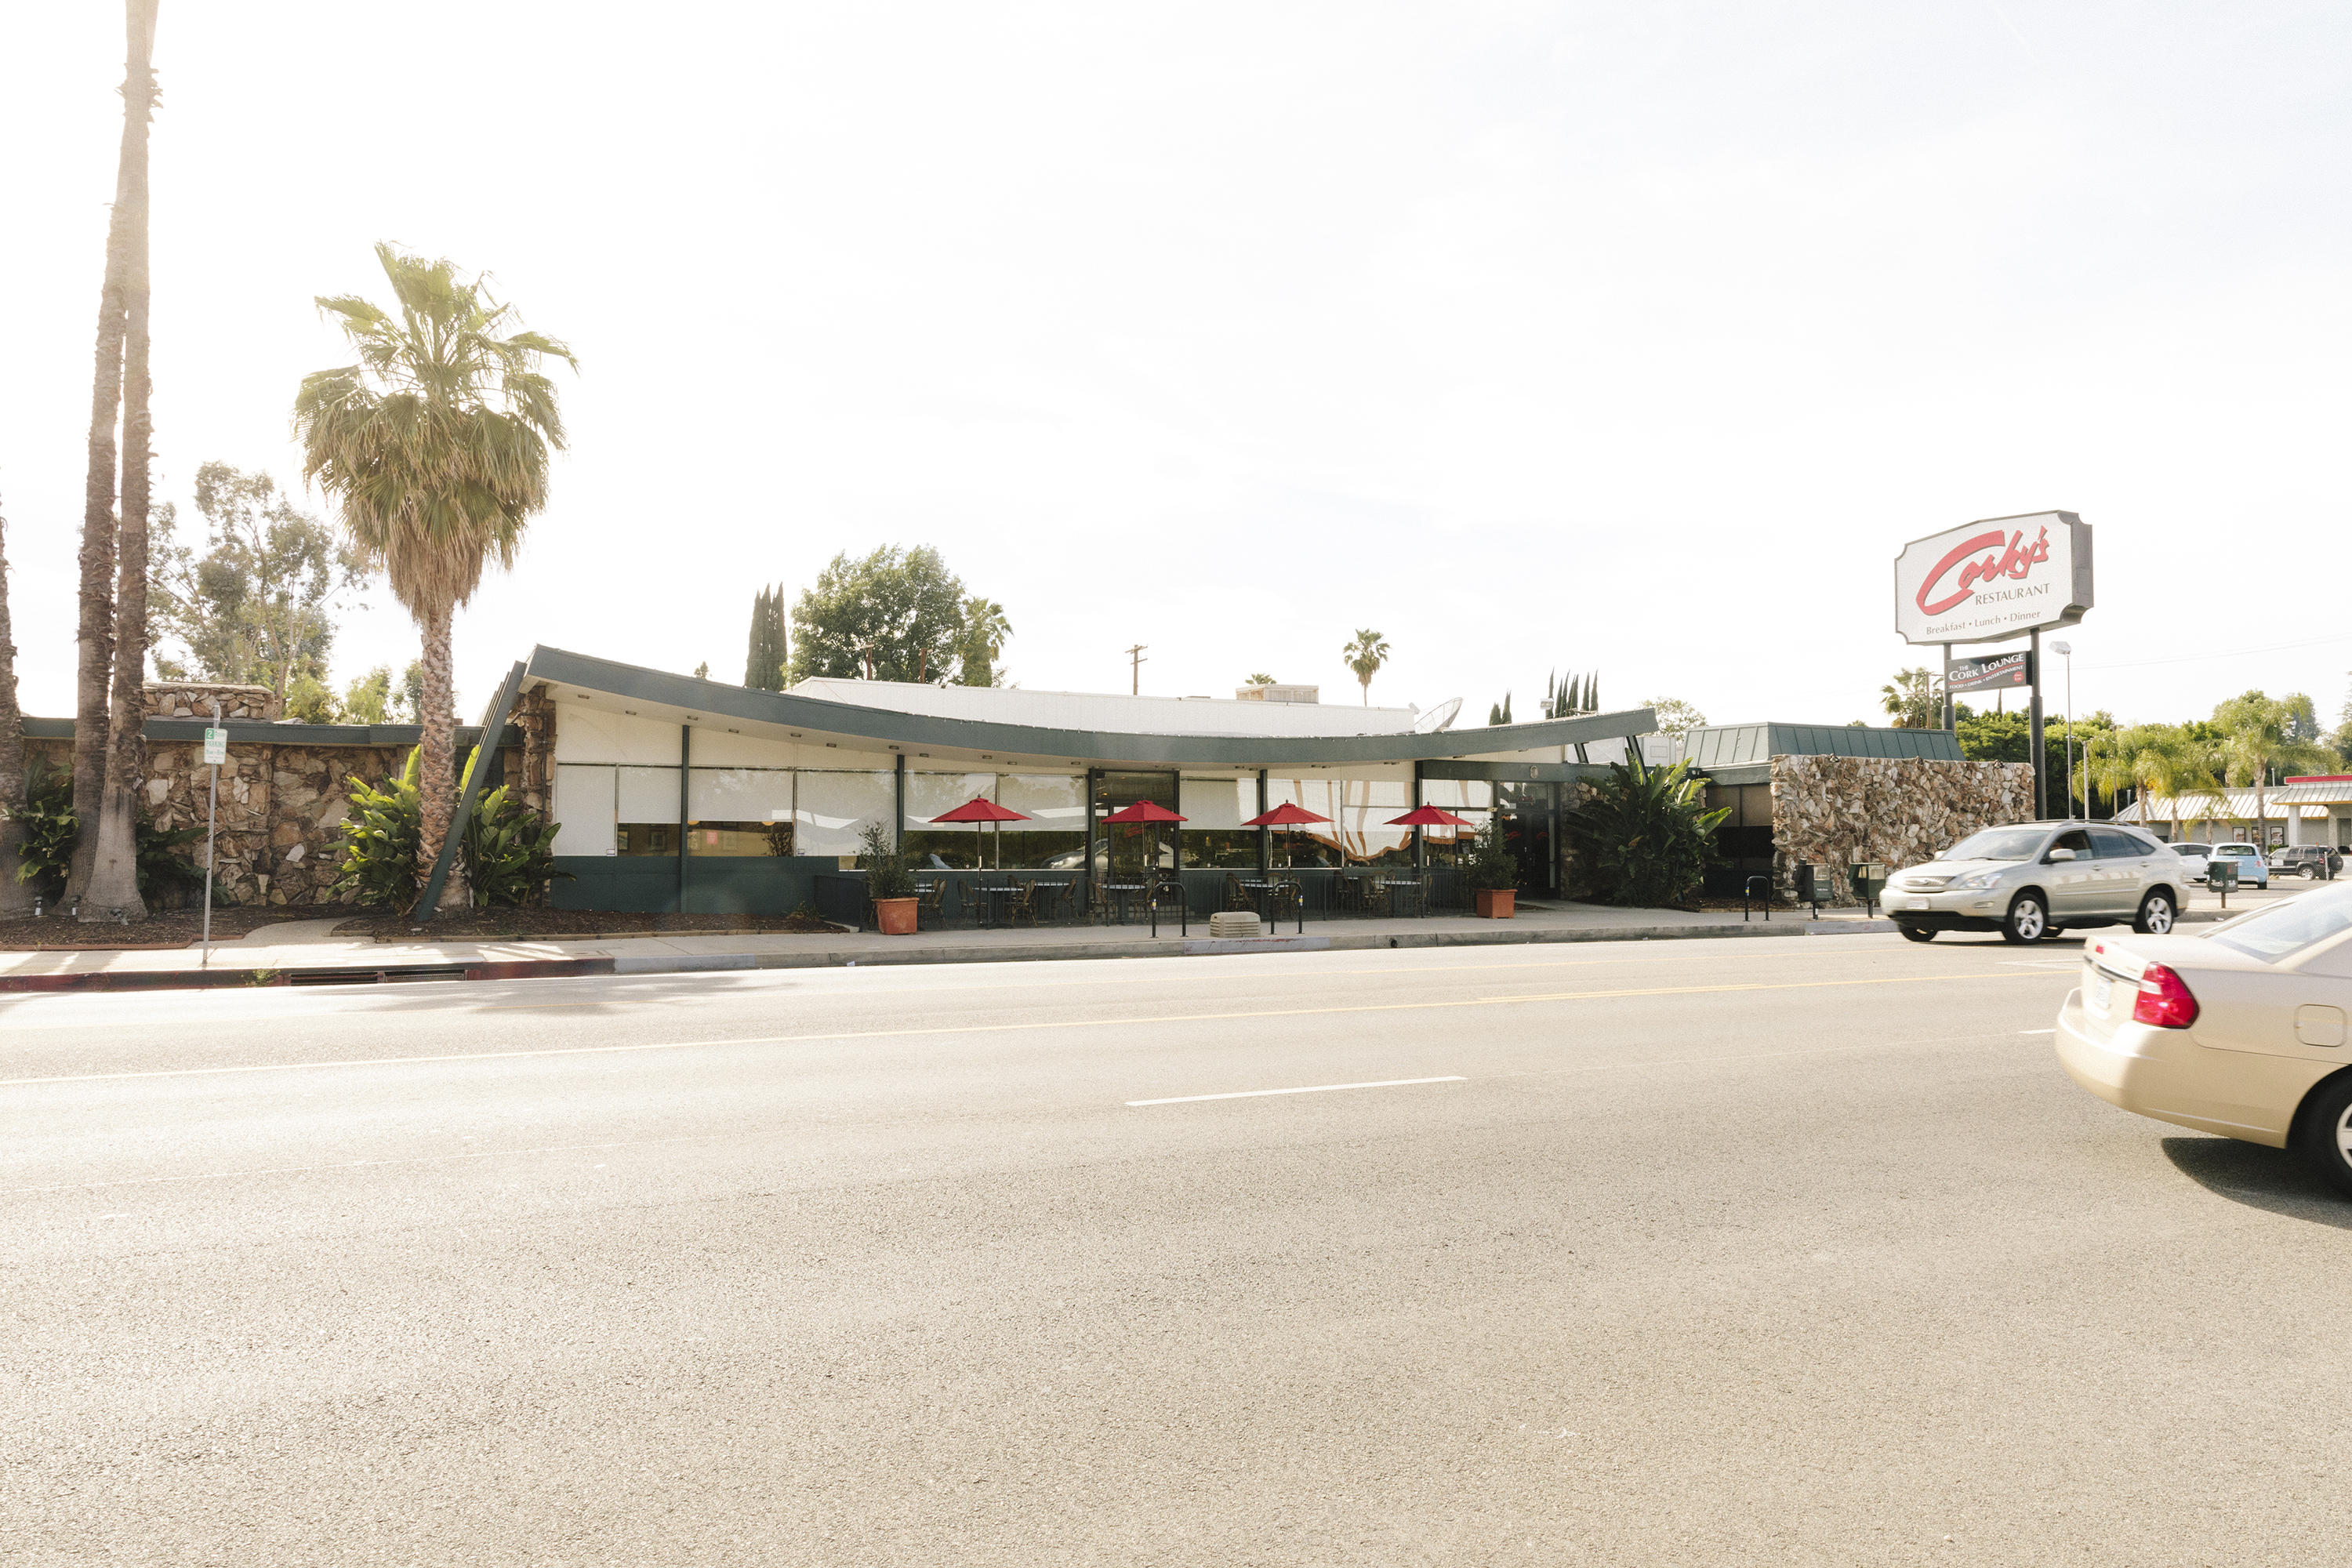 A single-story midcentury diner with a swooping long roof and a neon sign of the restaurant’s name (“Corky’s). 